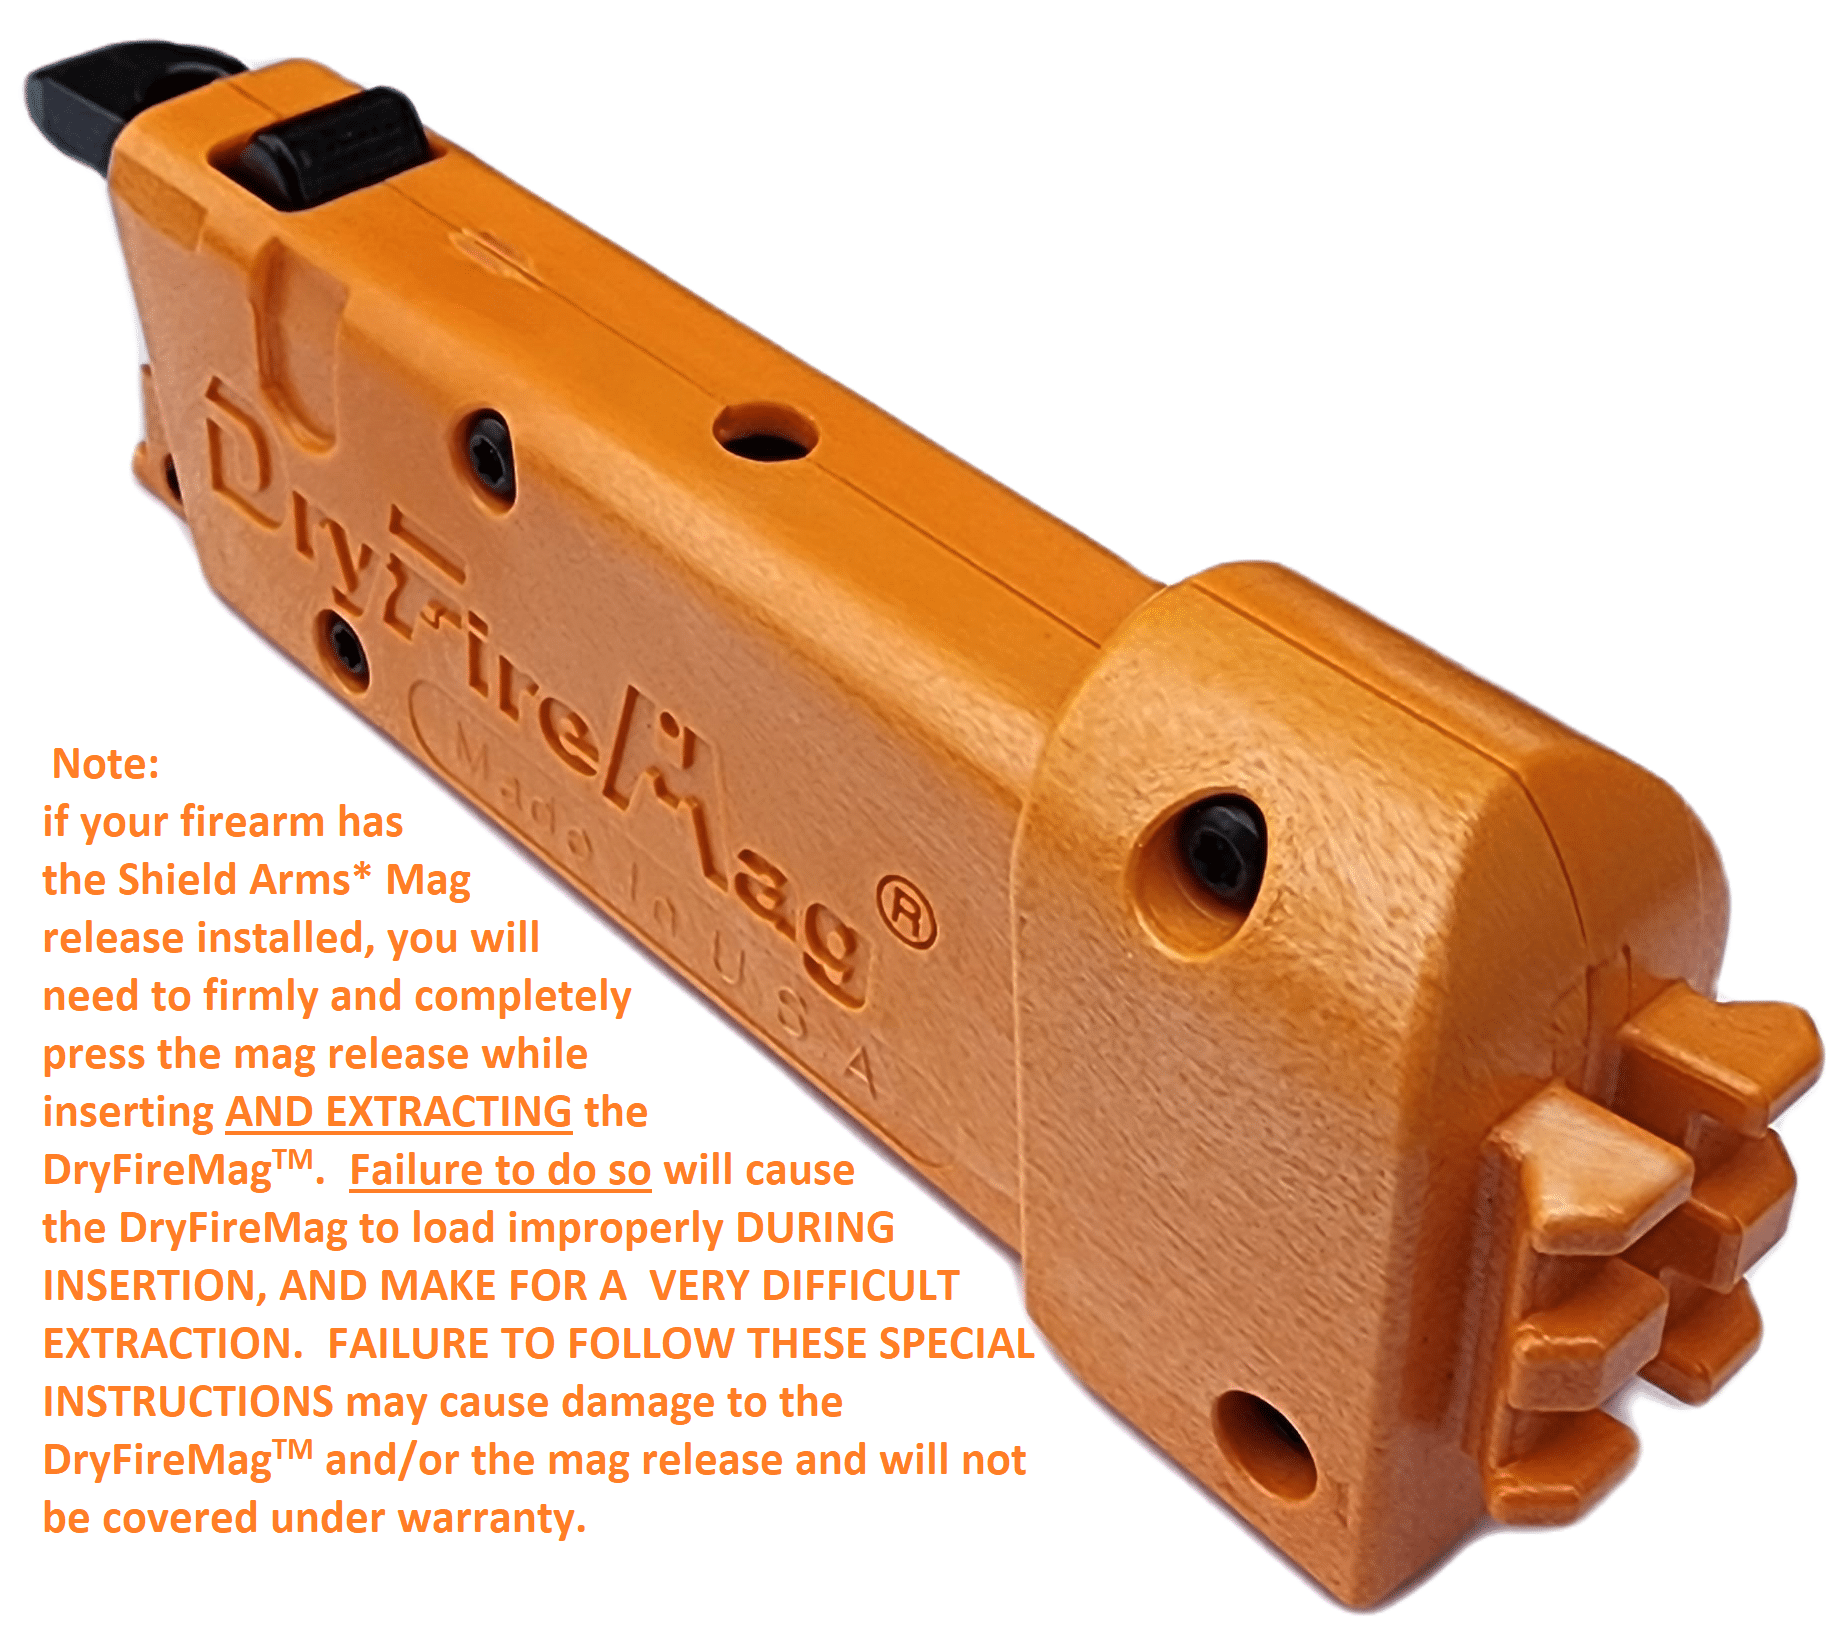 DryFireMag for use with Glock 43X/48 Shield Arms* Mag release warning.